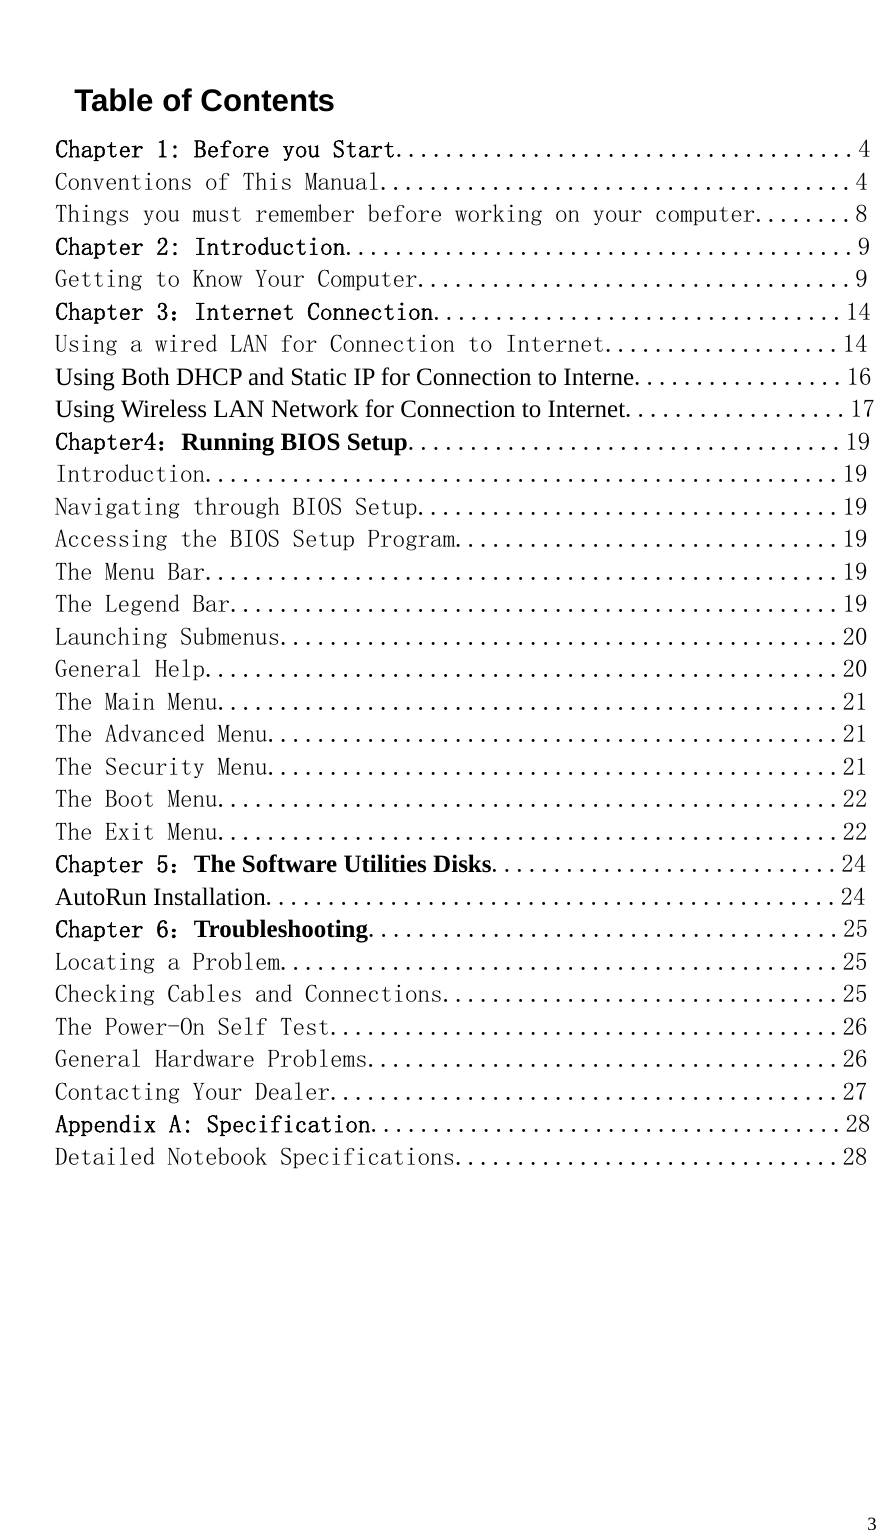   3 Table of Contents Chapter 1: Before you Start.....................................4 Conventions of This Manual......................................4 Things you must remember before working on your computer........8 Chapter 2: Introduction.........................................9 Getting to Know Your Computer...................................9 Chapter 3：Internet Connection.................................14 Using a wired LAN for Connection to Internet...................14 Using Both DHCP and Static IP for Connection to Interne.................16 Using Wireless LAN Network for Connection to Internet..................17 Chapter4：Running BIOS Setup...................................19 Introduction...................................................19 Navigating through BIOS Setup..................................19 Accessing the BIOS Setup Program...............................19 The Menu Bar...................................................19 The Legend Bar.................................................19 Launching Submenus.............................................20 General Help...................................................20 The Main Menu..................................................21 The Advanced Menu..............................................21 The Security Menu..............................................21 The Boot Menu..................................................22 The Exit Menu..................................................22 Chapter 5：The Software Utilities Disks............................24 AutoRun Installation..............................................24 Chapter 6：Troubleshooting......................................25 Locating a Problem.............................................25 Checking Cables and Connections................................25 The Power-On Self Test.........................................26 General Hardware Problems......................................26 Contacting Your Dealer.........................................27 Appendix A: Specification......................................28 Detailed Notebook Specifications...............................28          